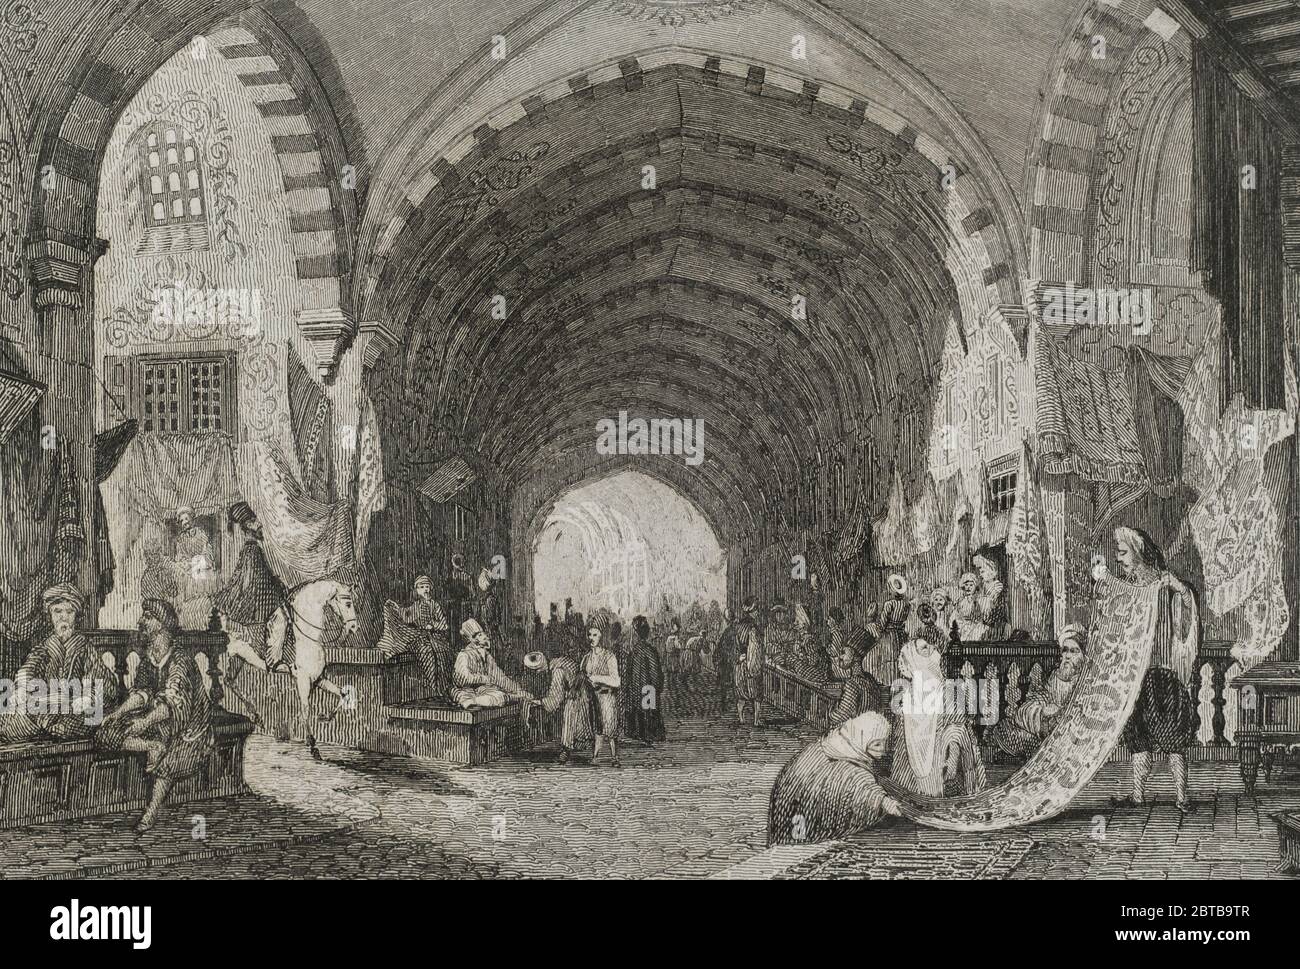 Ottoman Empire. Turkey. Constantinople (today Istanbul). The Bazaar. Engraving by Lemaitre. Historia de Turquia by Joseph Marie Jouannin (1783-1844) and Jules Van Gaver, 1840. Stock Photo